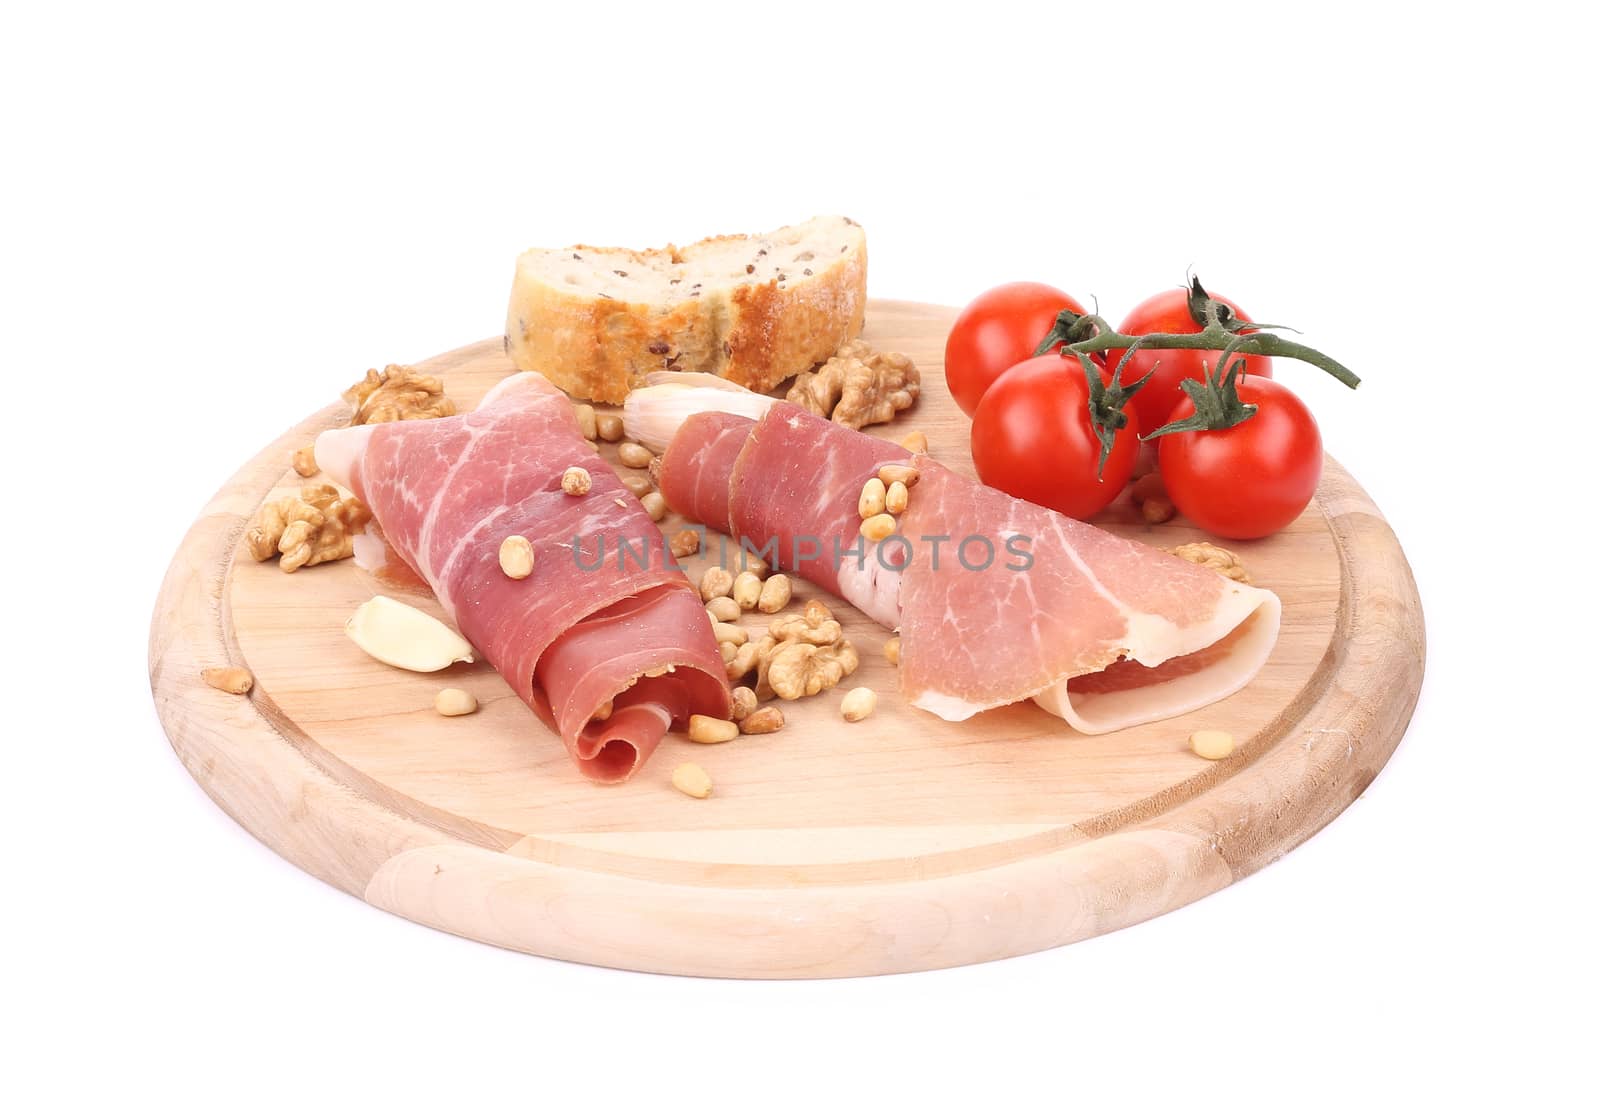 Composition of prosciutto on wooden platter. by indigolotos